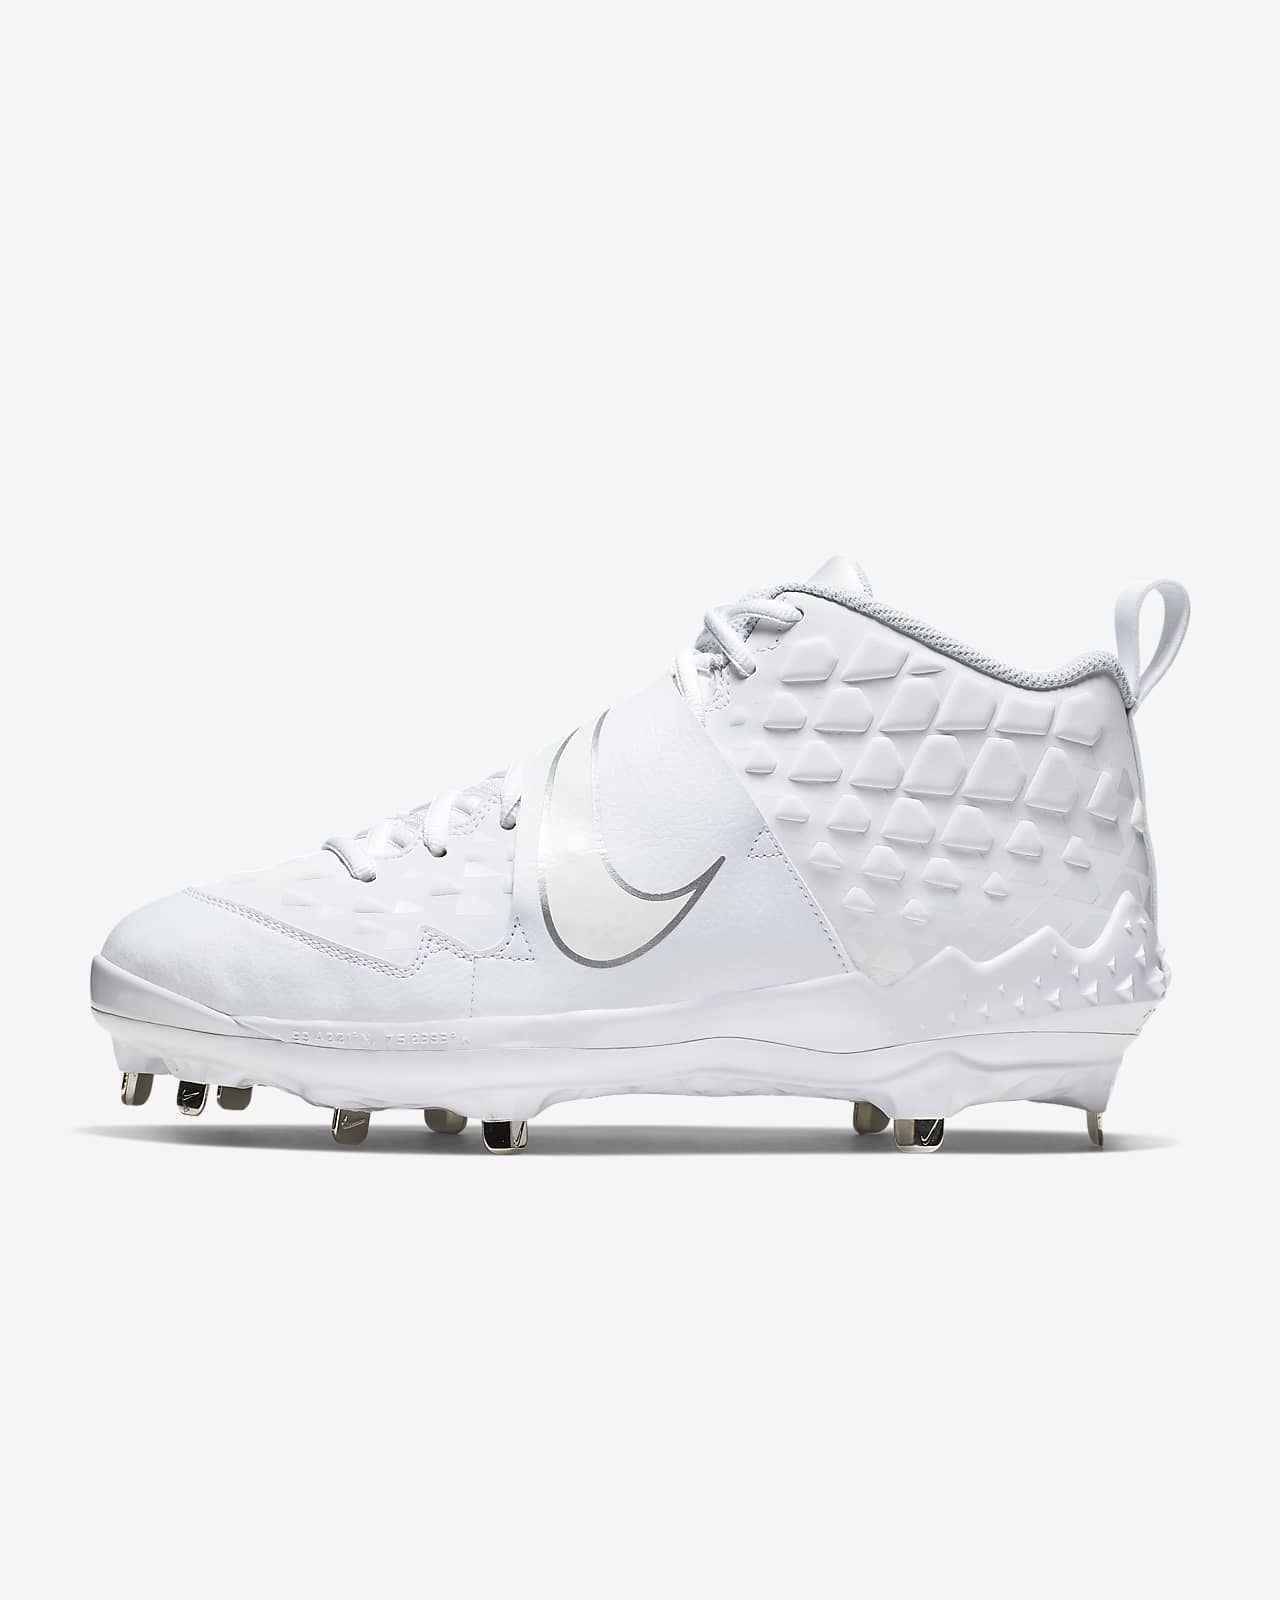 2020 mike trout cleats